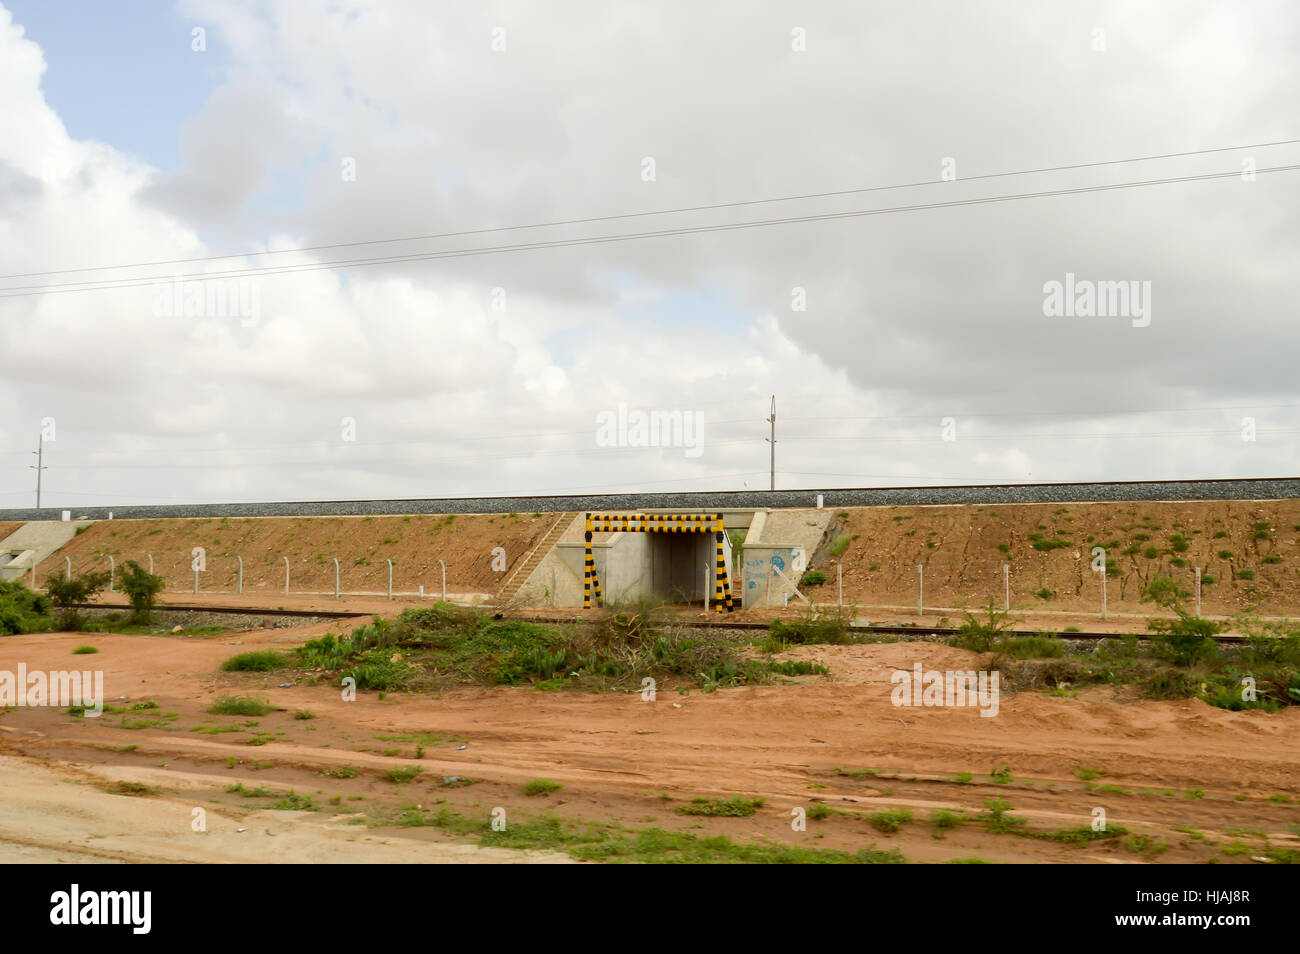 Passage of vehicles under the Mombasa railway line to Nairobi with a height control bar in Kenya Stock Photo